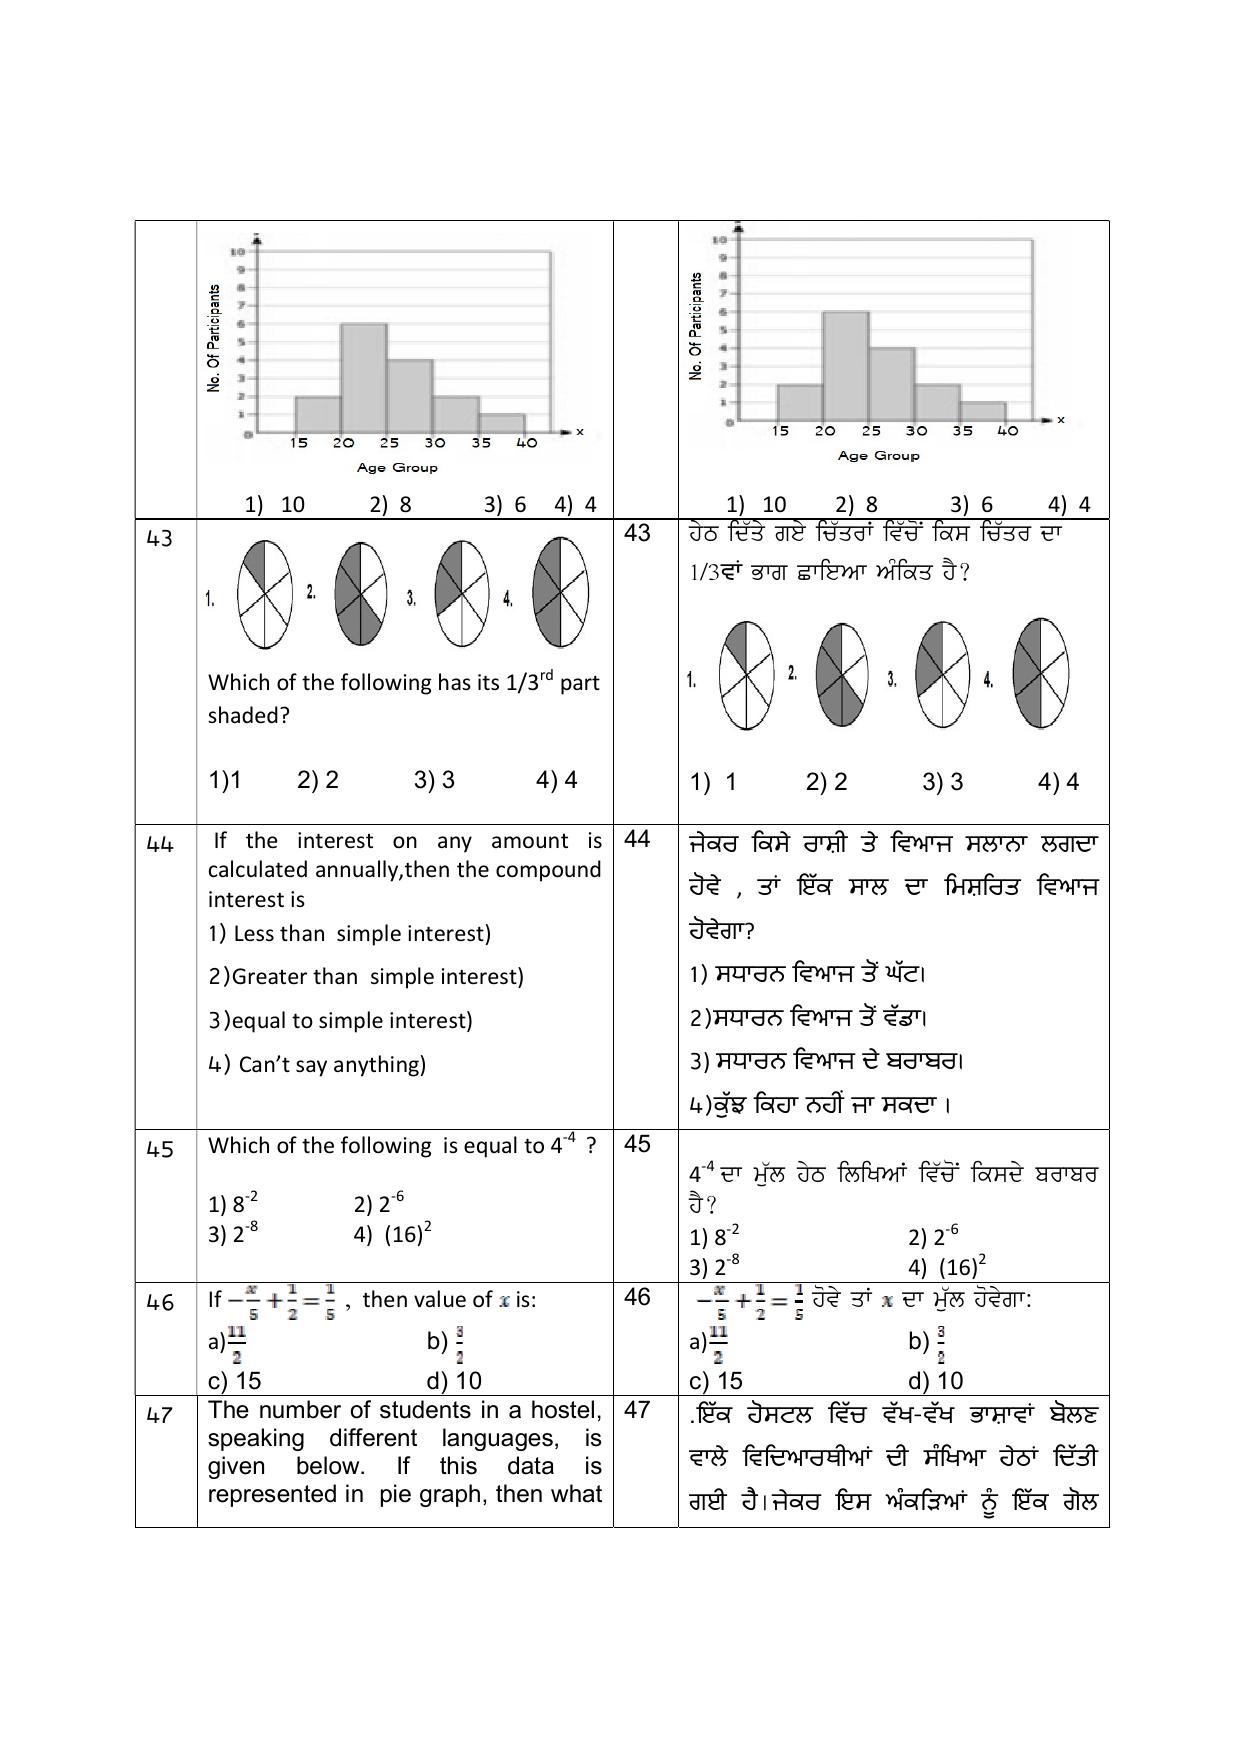 Punjab School of Eminence Class 9 Sample Question Paper - Page 7